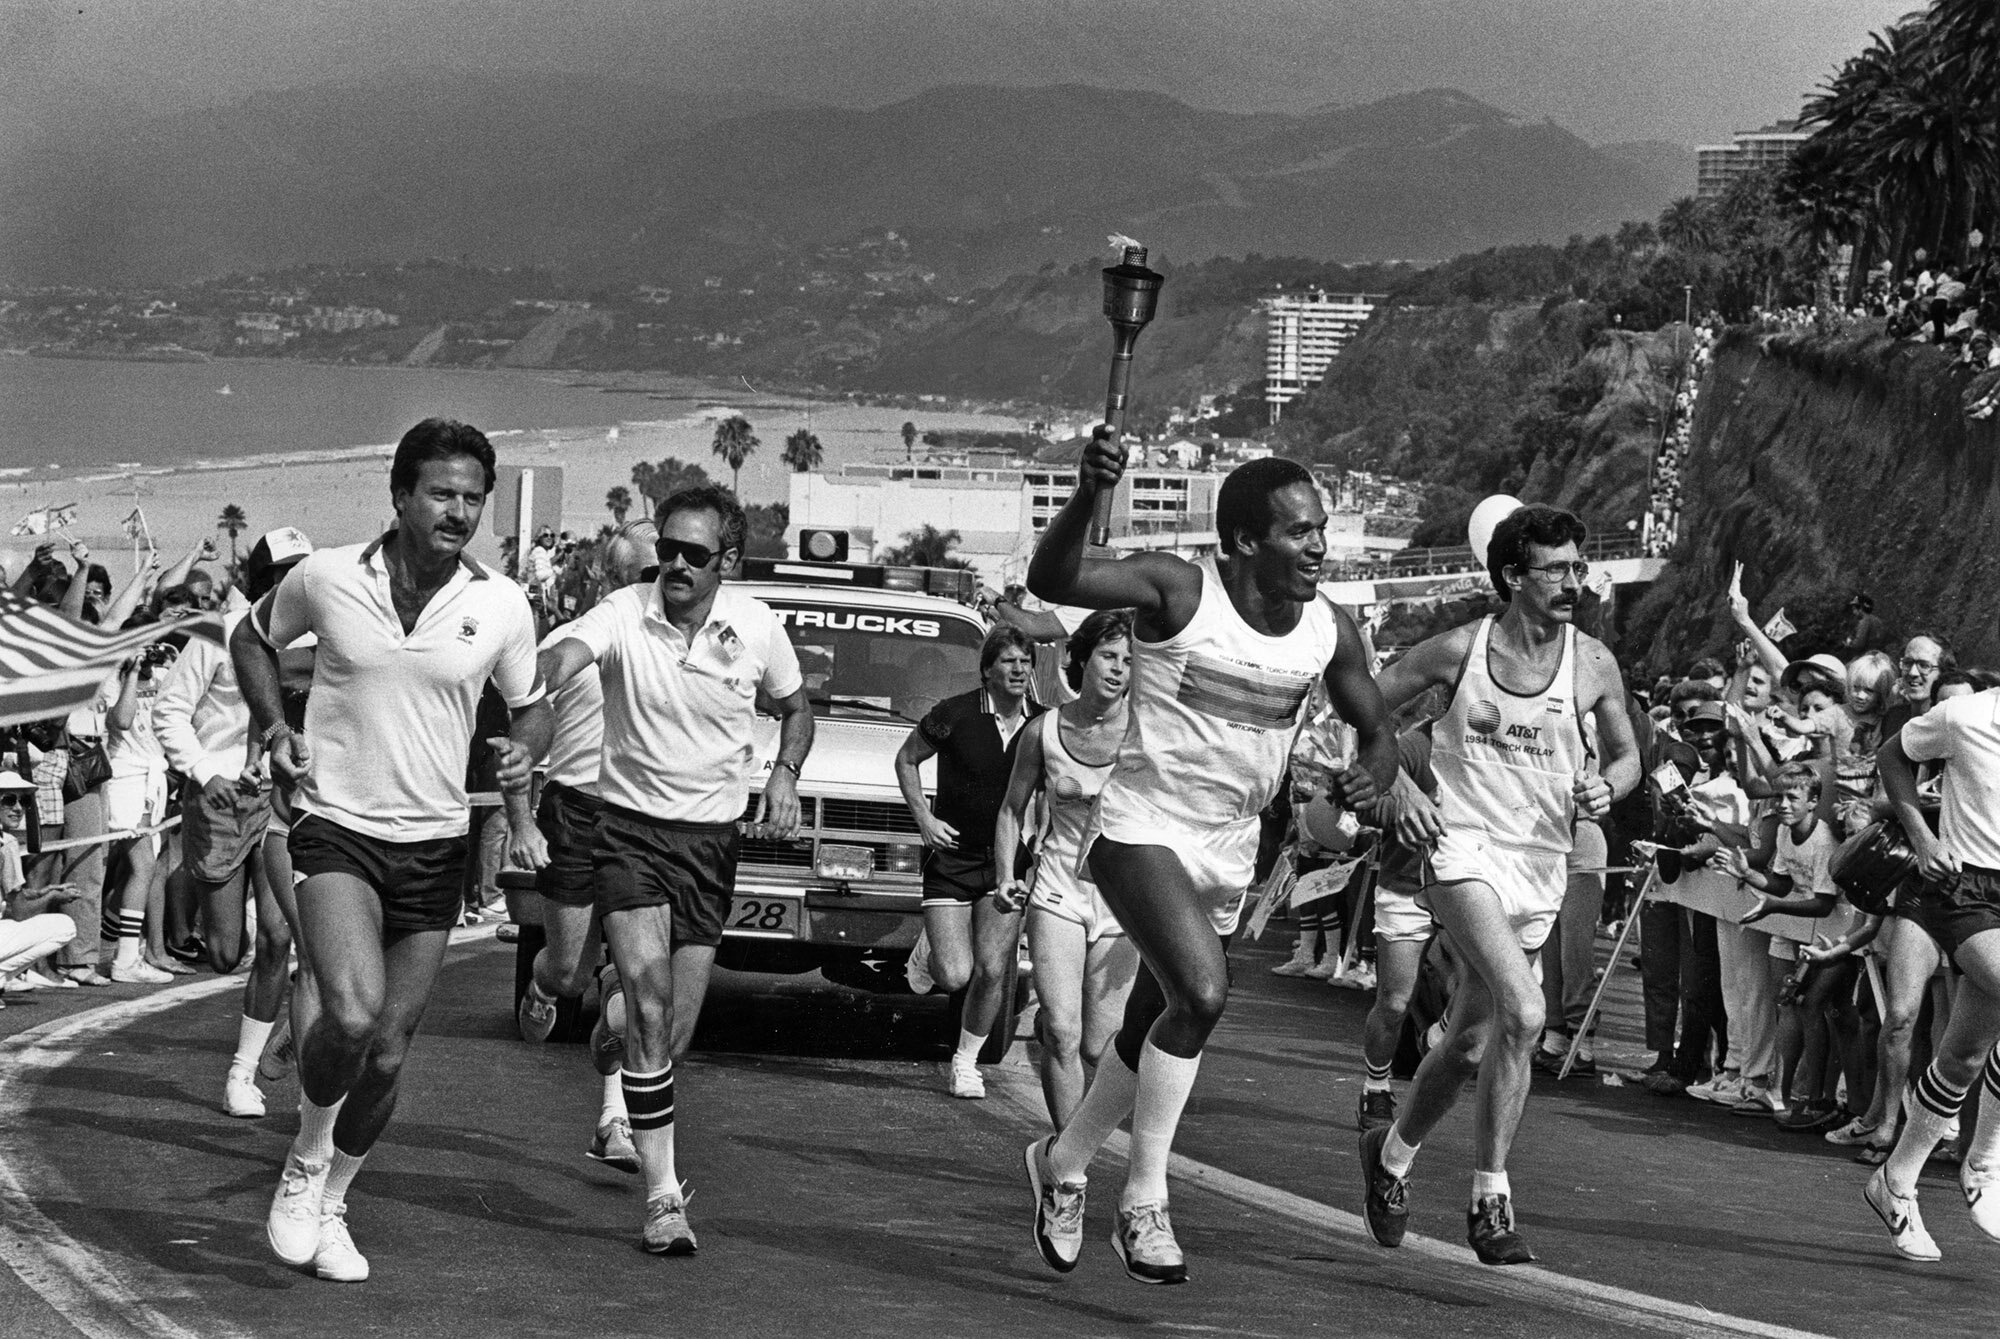  July 21, 1984: O. J. Simpson carries Olympic Torch up California Incline in Santa Monica. Photo by Marsha Traeger/Los Angeles Times. This photo was published in the July 22, 1984 Los Angeles Times. Photo: Marsha Traeger-Gorman 